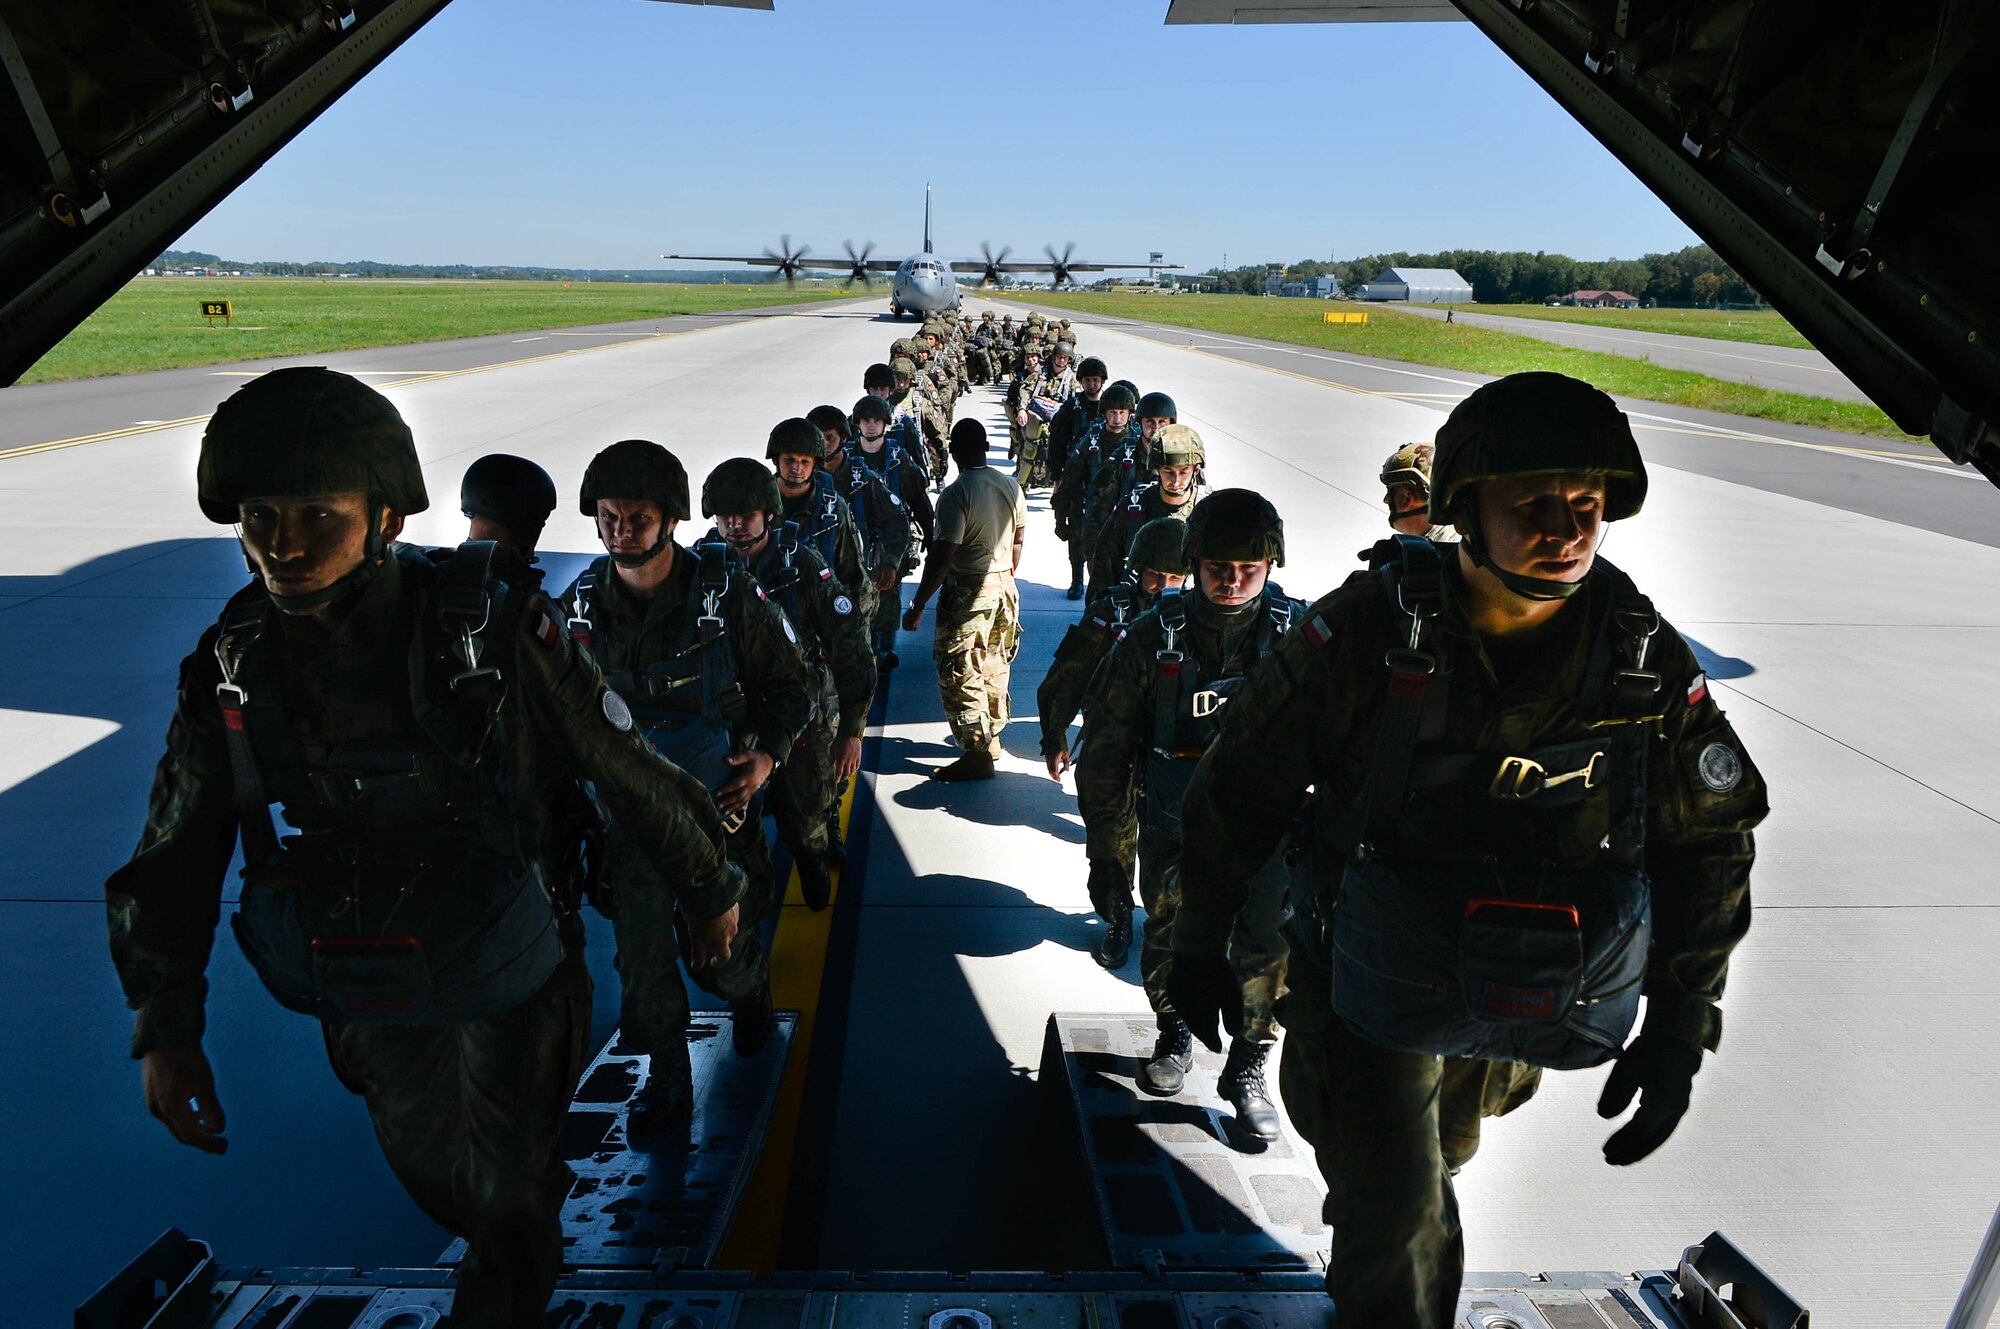 Polish paratroopers sit down after boarding a U.S. Air Force C-130J Super Hercules during Exercise Aviation Rotation 18-4 at Krakow, Poland, Aug. 7, 2018. The airdrop operations conducted during Aviation Rotation were static line jumps and High Altitude-Low Opening jumps. (U.S. Air Force photo by Senior Airman Joshua Magbanua)